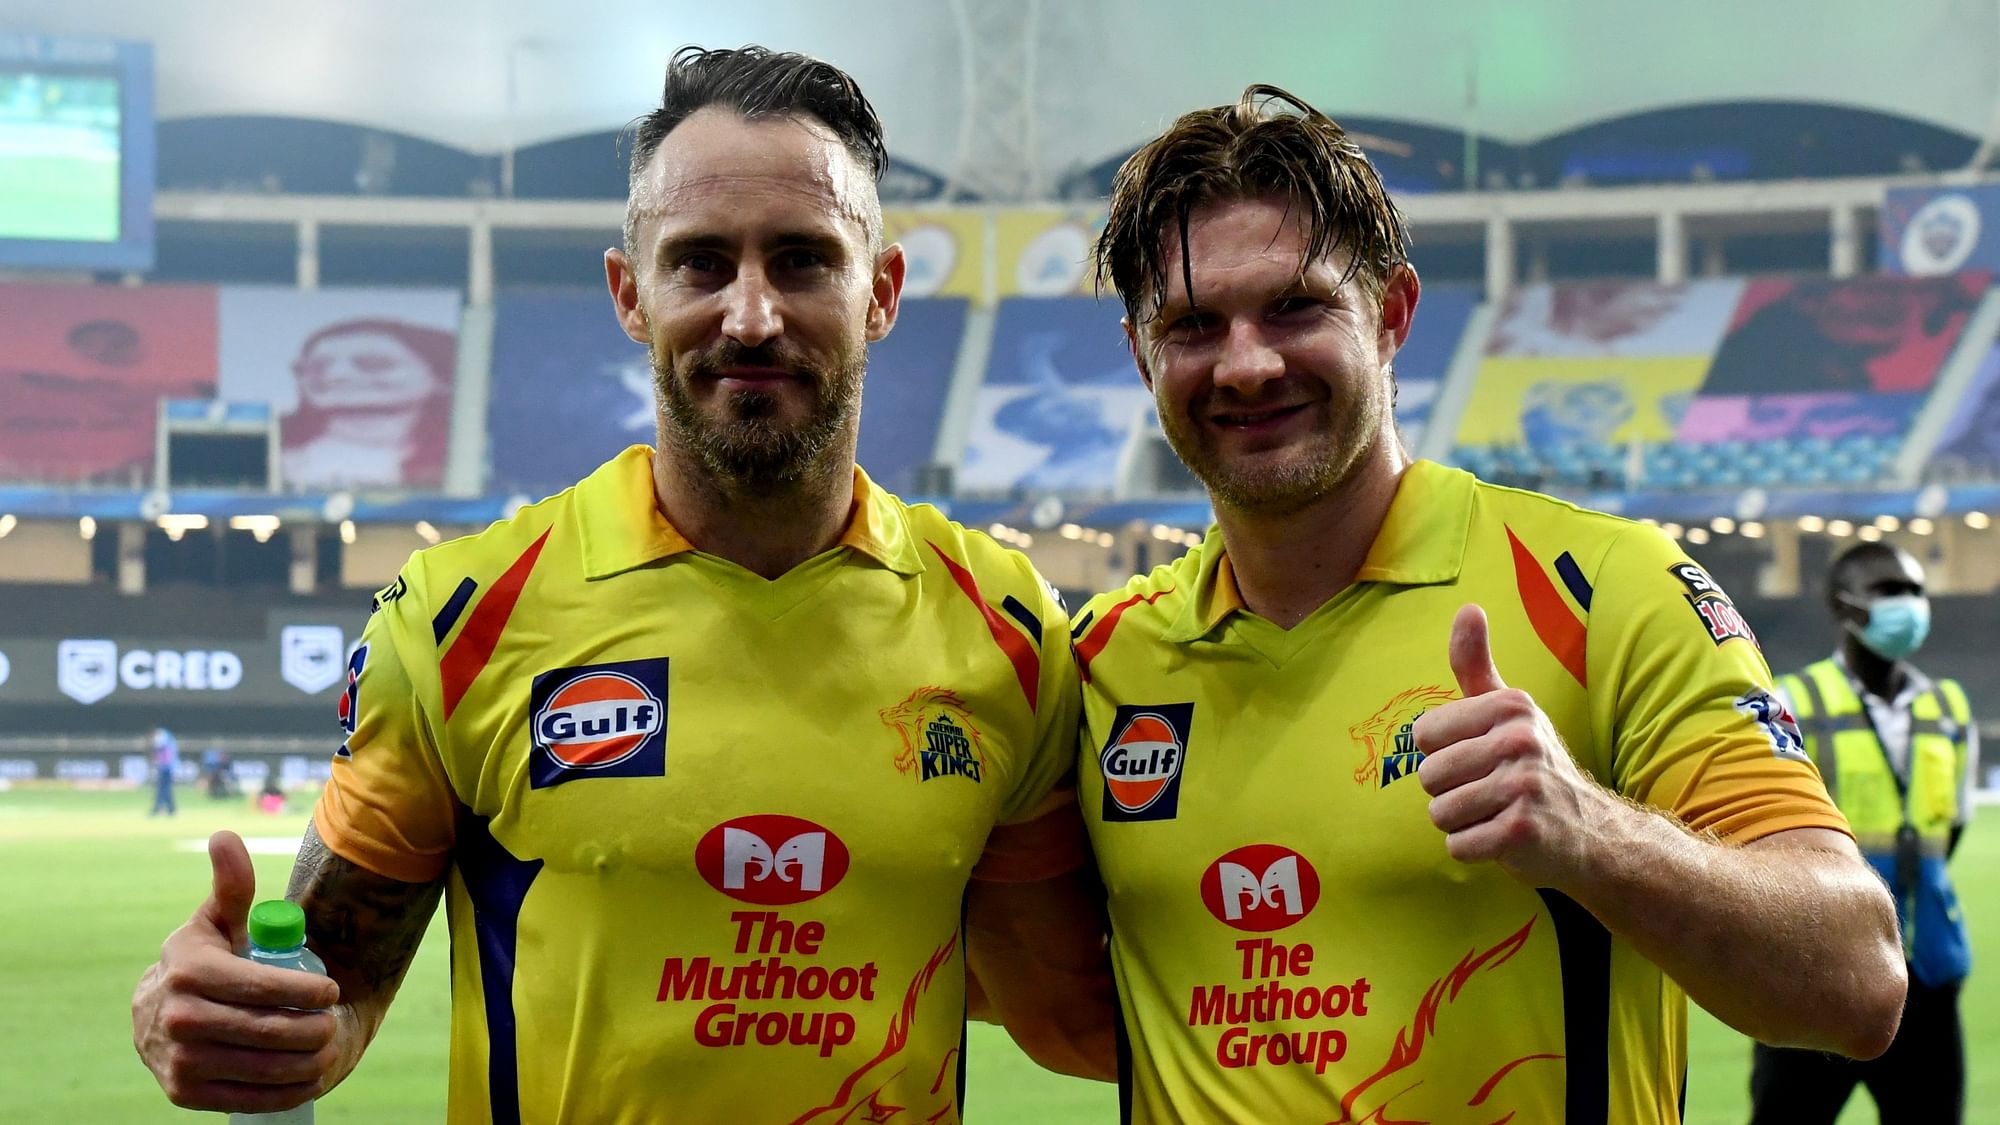 Shane Watson and Faf du Plessis’ 181-run opening stand helps CSK beat KXIP by 10 wickets.